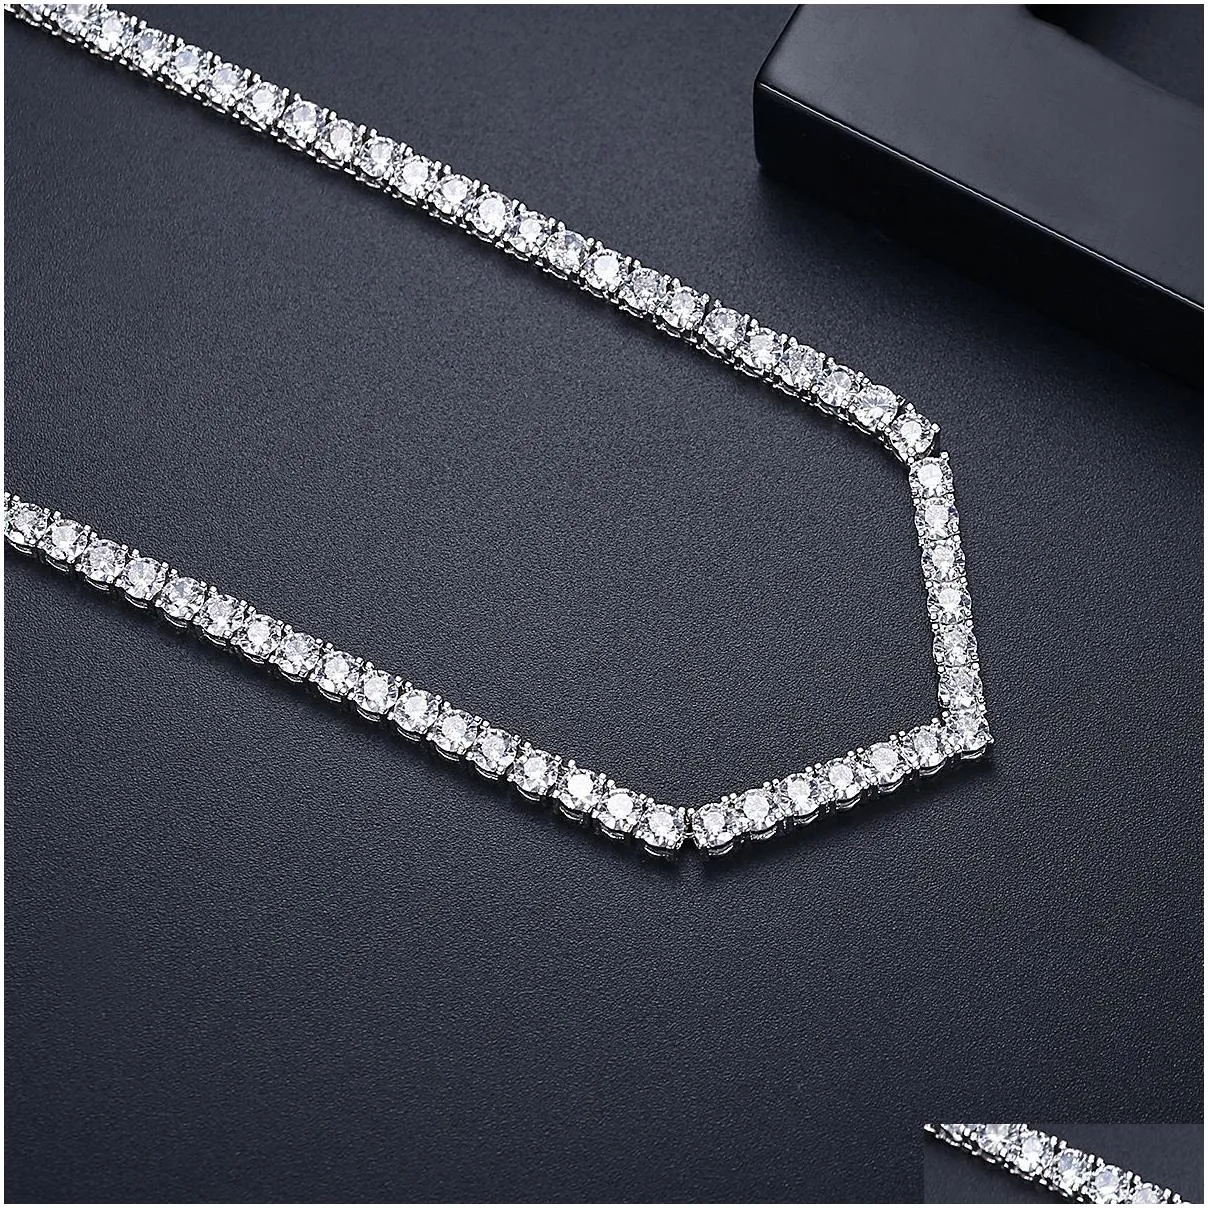 14K White Gold Tennis Lovers Necklace Lab Diamond Cz chorker Pendant Necklaces for Women Men Party Wedding jewelry Gift